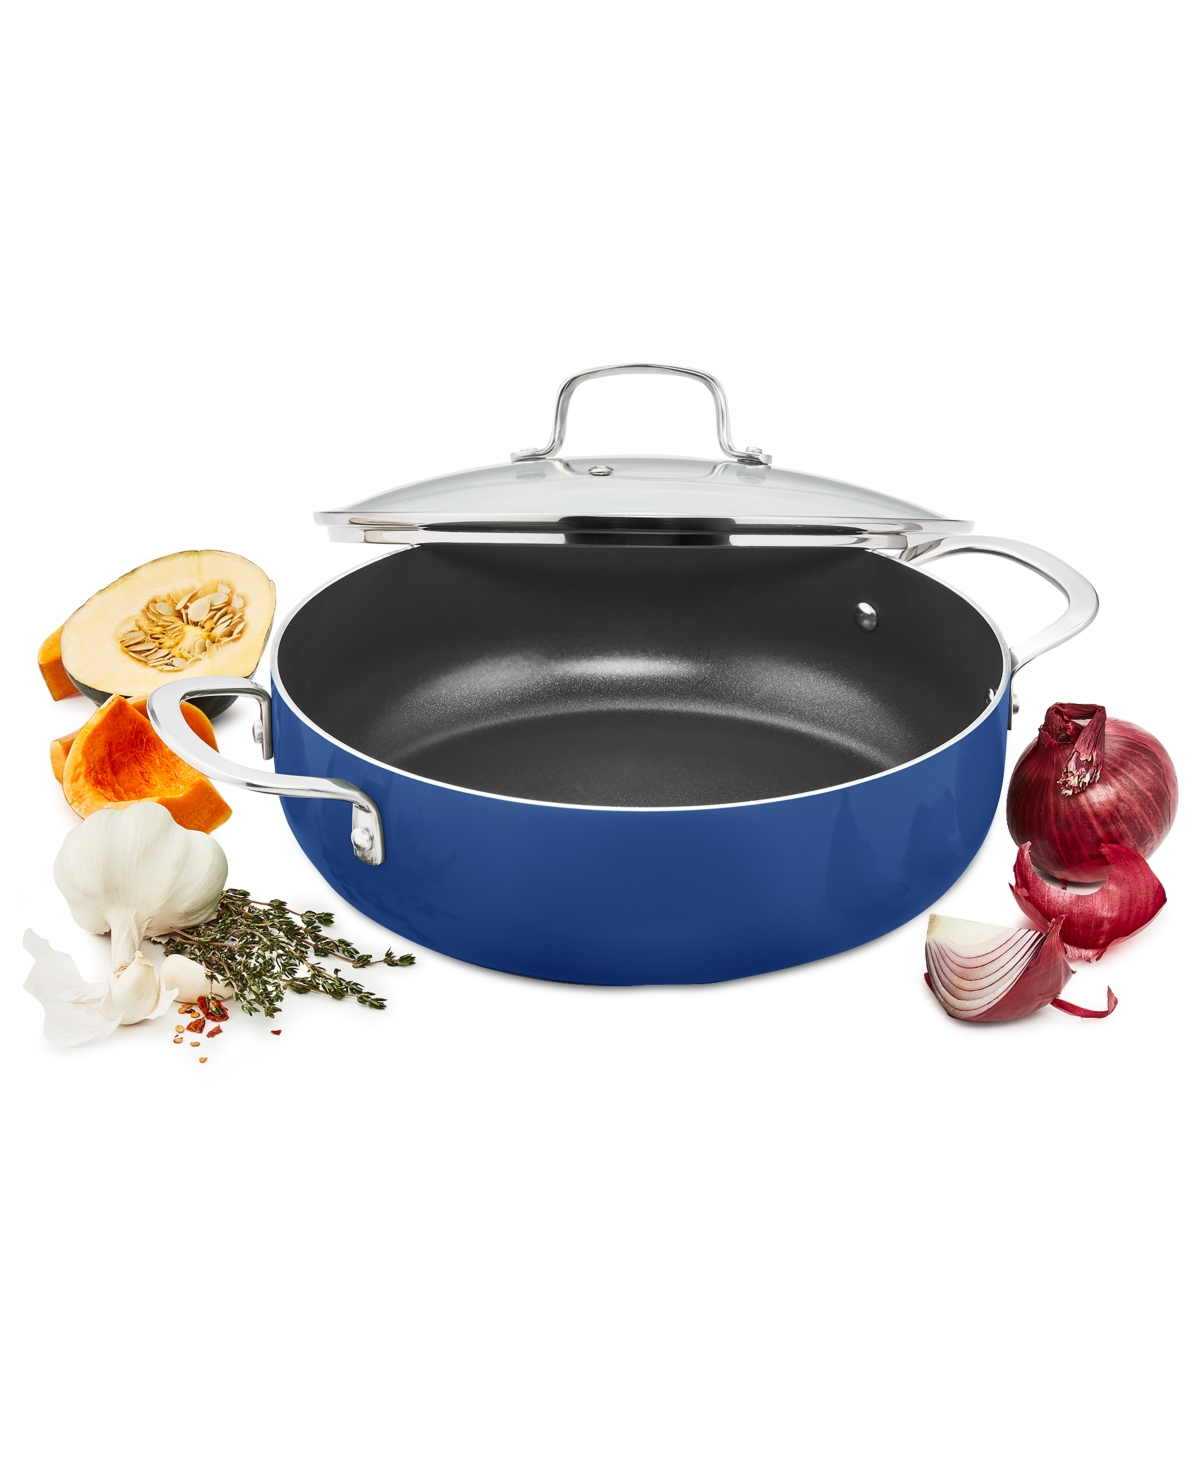 The Cellar Aluminum Nonstick 5-qt. Covered Everyday Pan In Blue